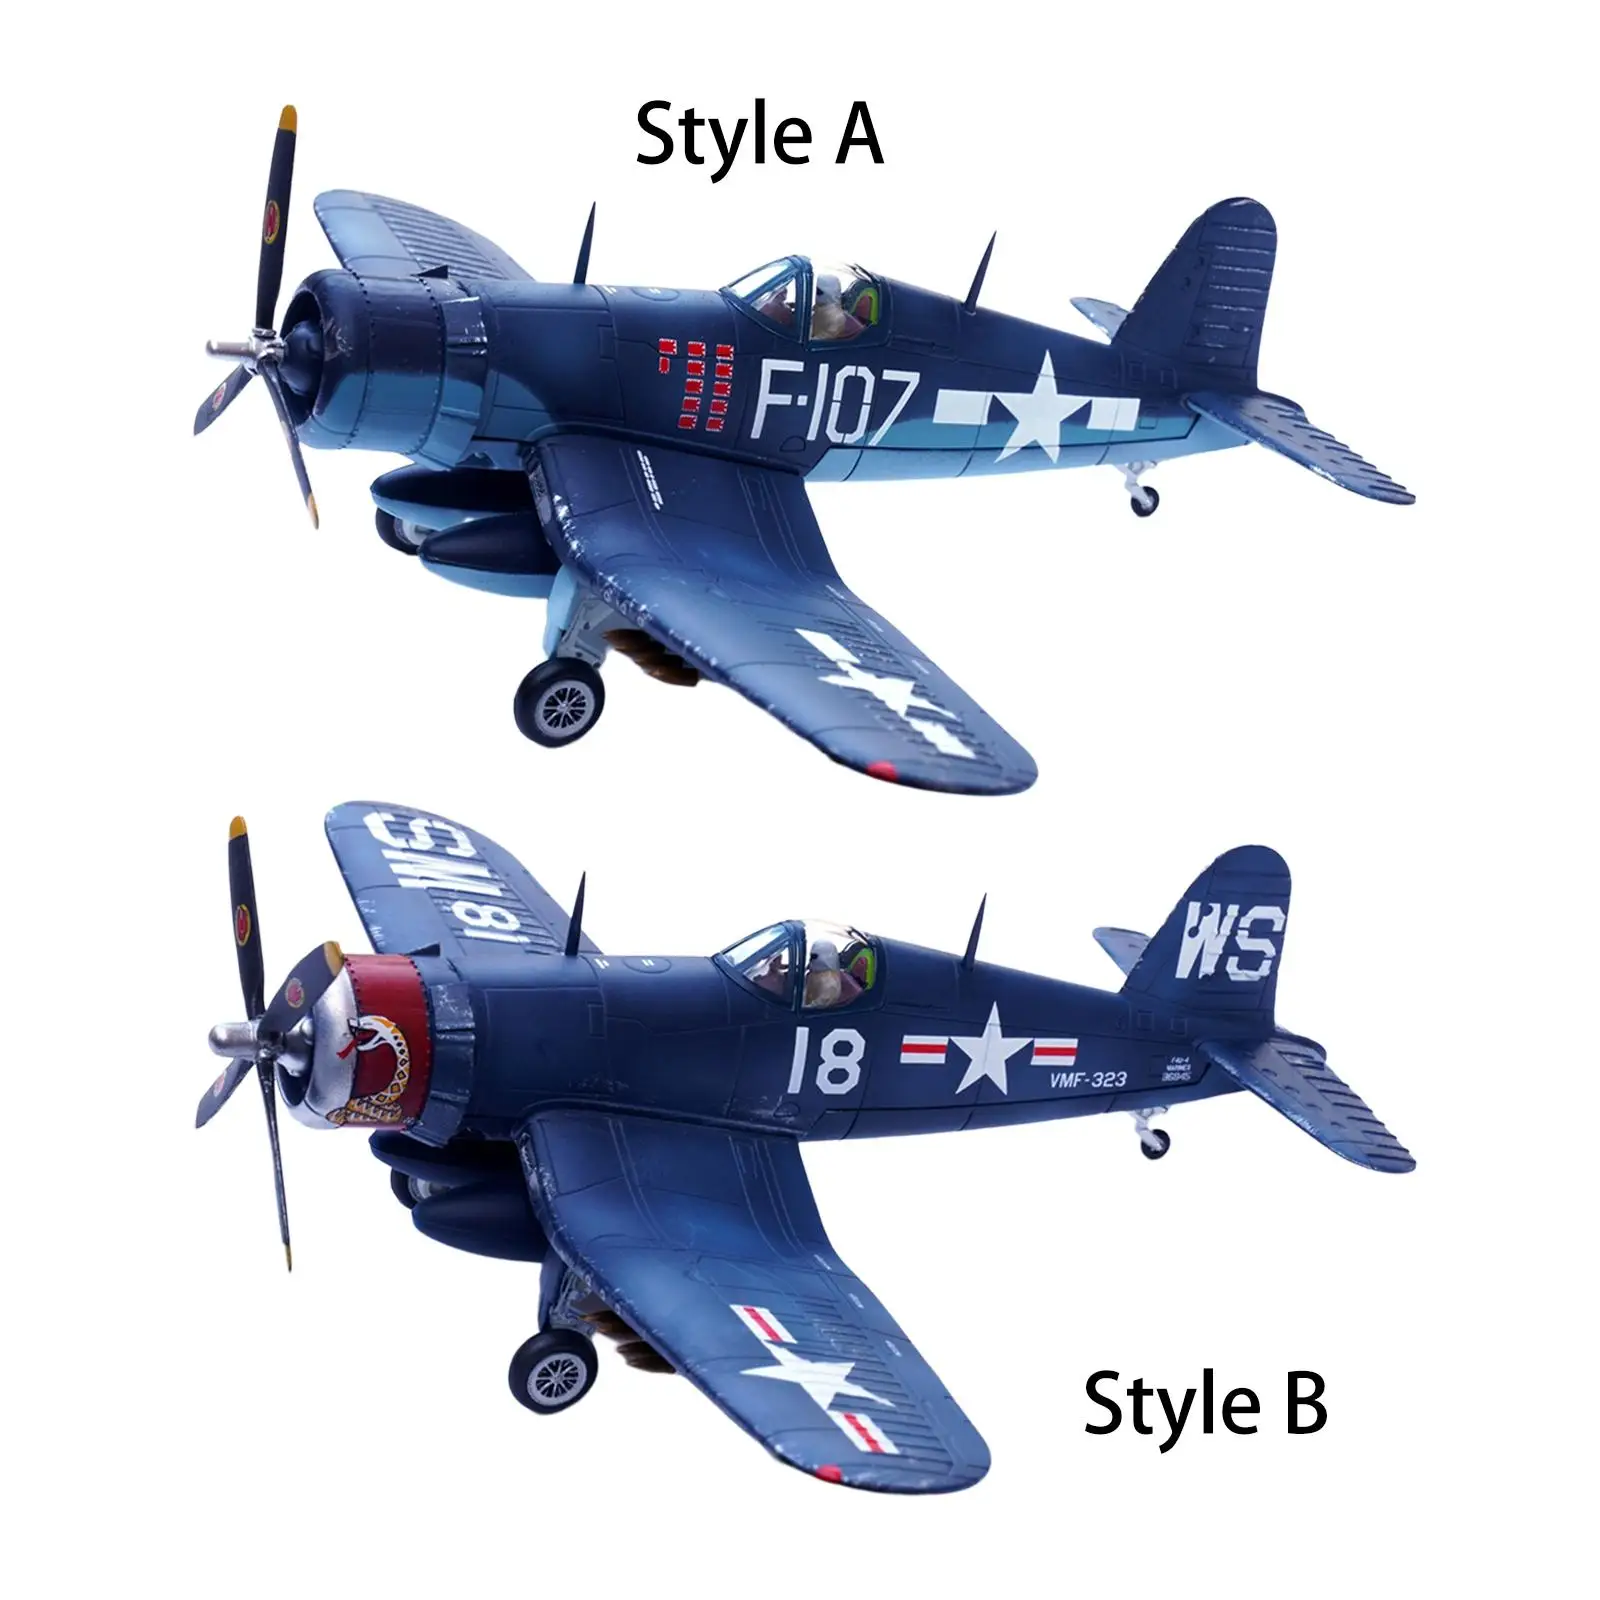 

Miniature Aircraft Model Table Centerpiece 1/72 Plane Model 1:72 Scale Airplane Model for Children Adults Boys Kids Girls